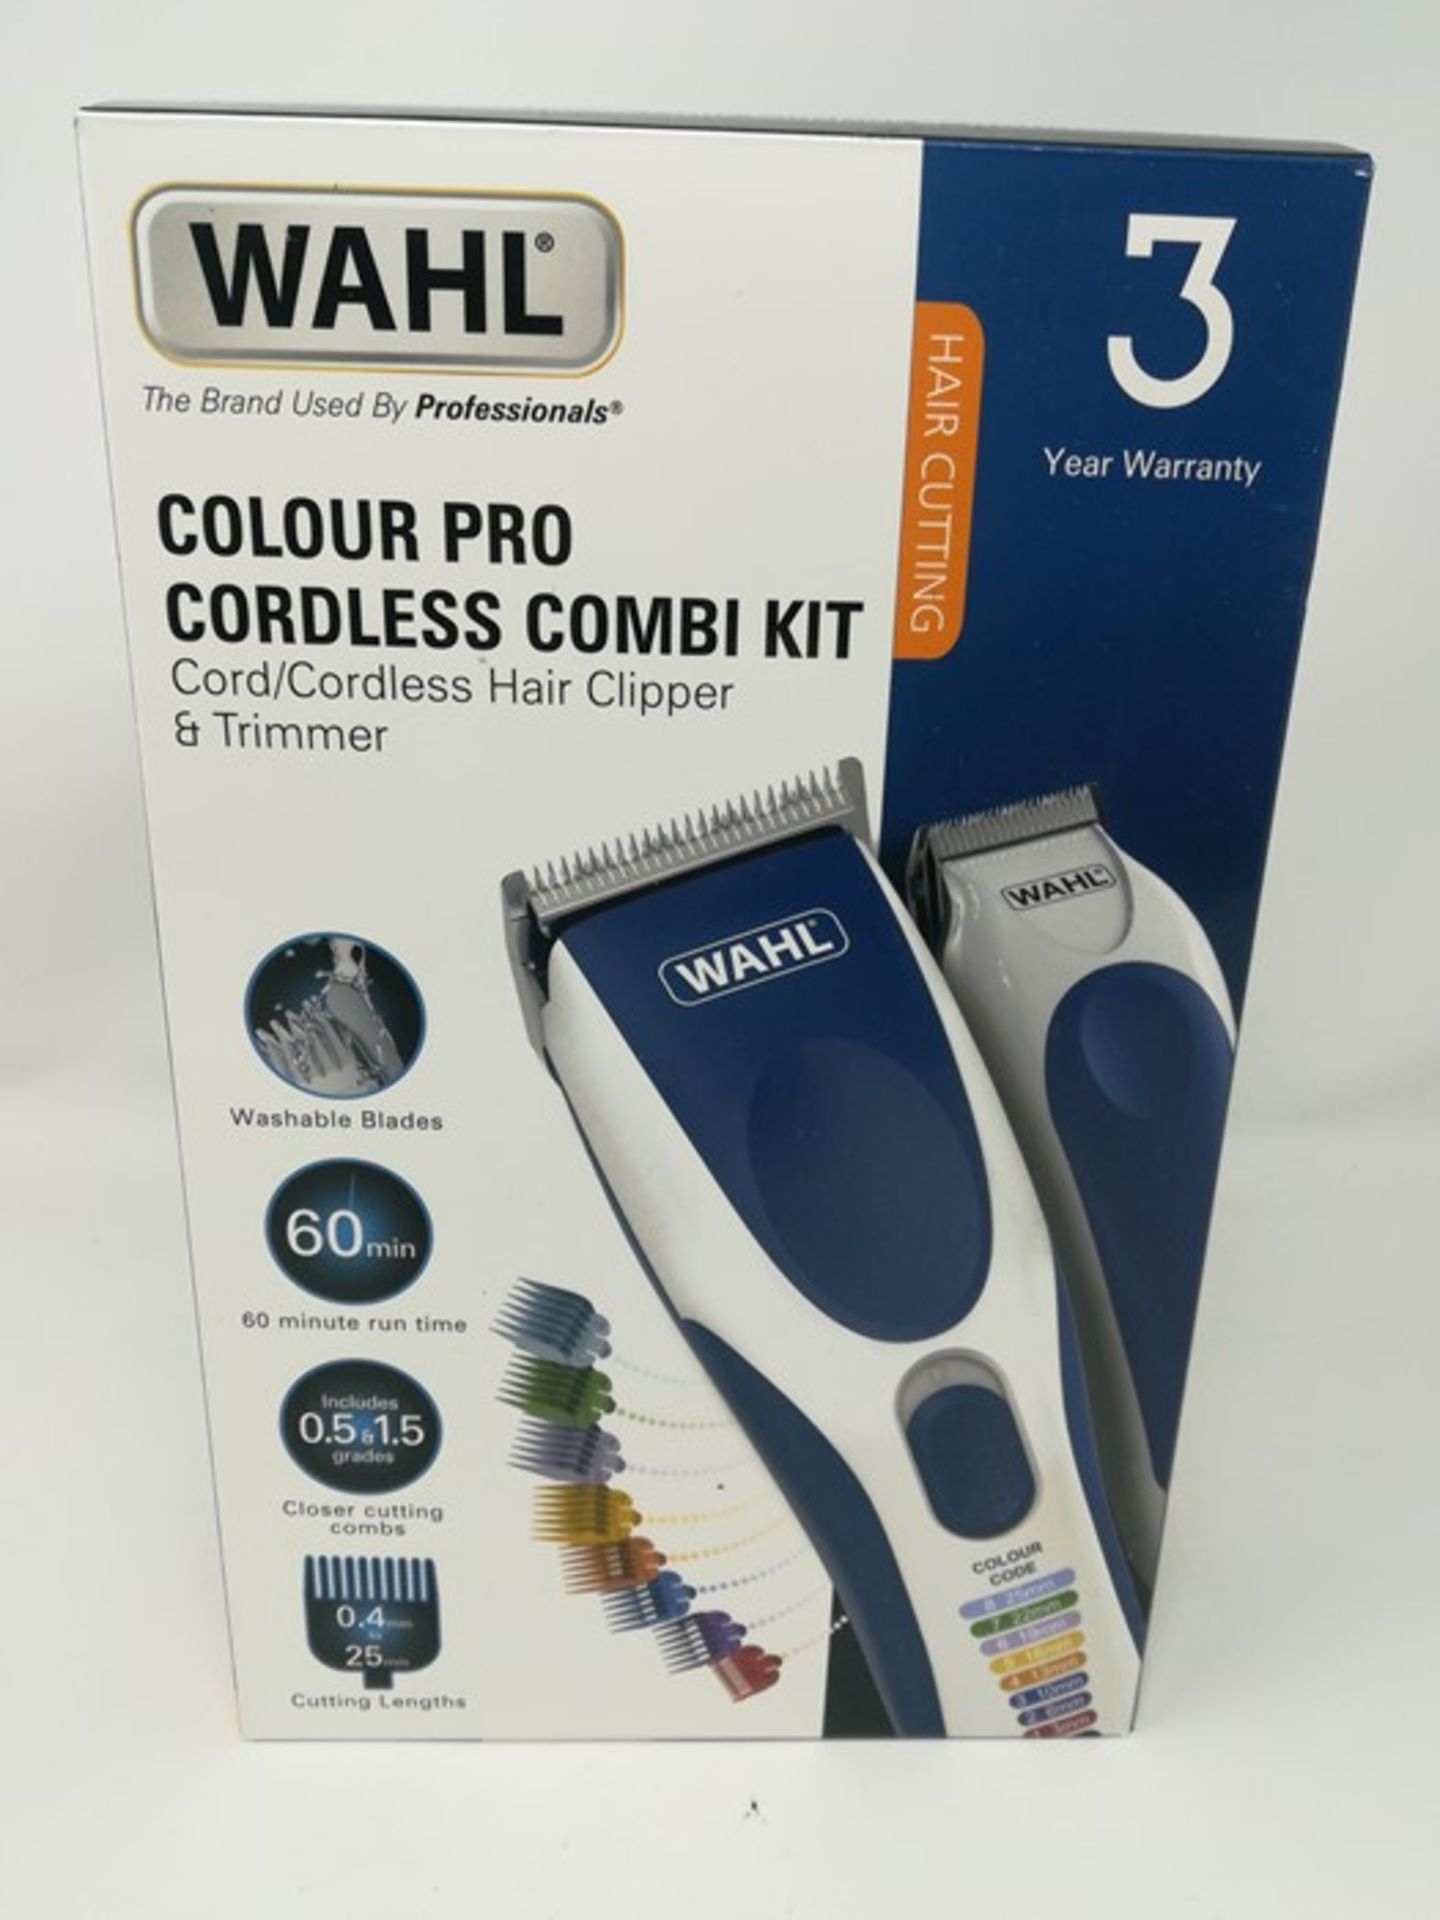 Wahl Hair Clippers for Men, Colour Pro Cordless - Image 2 of 2